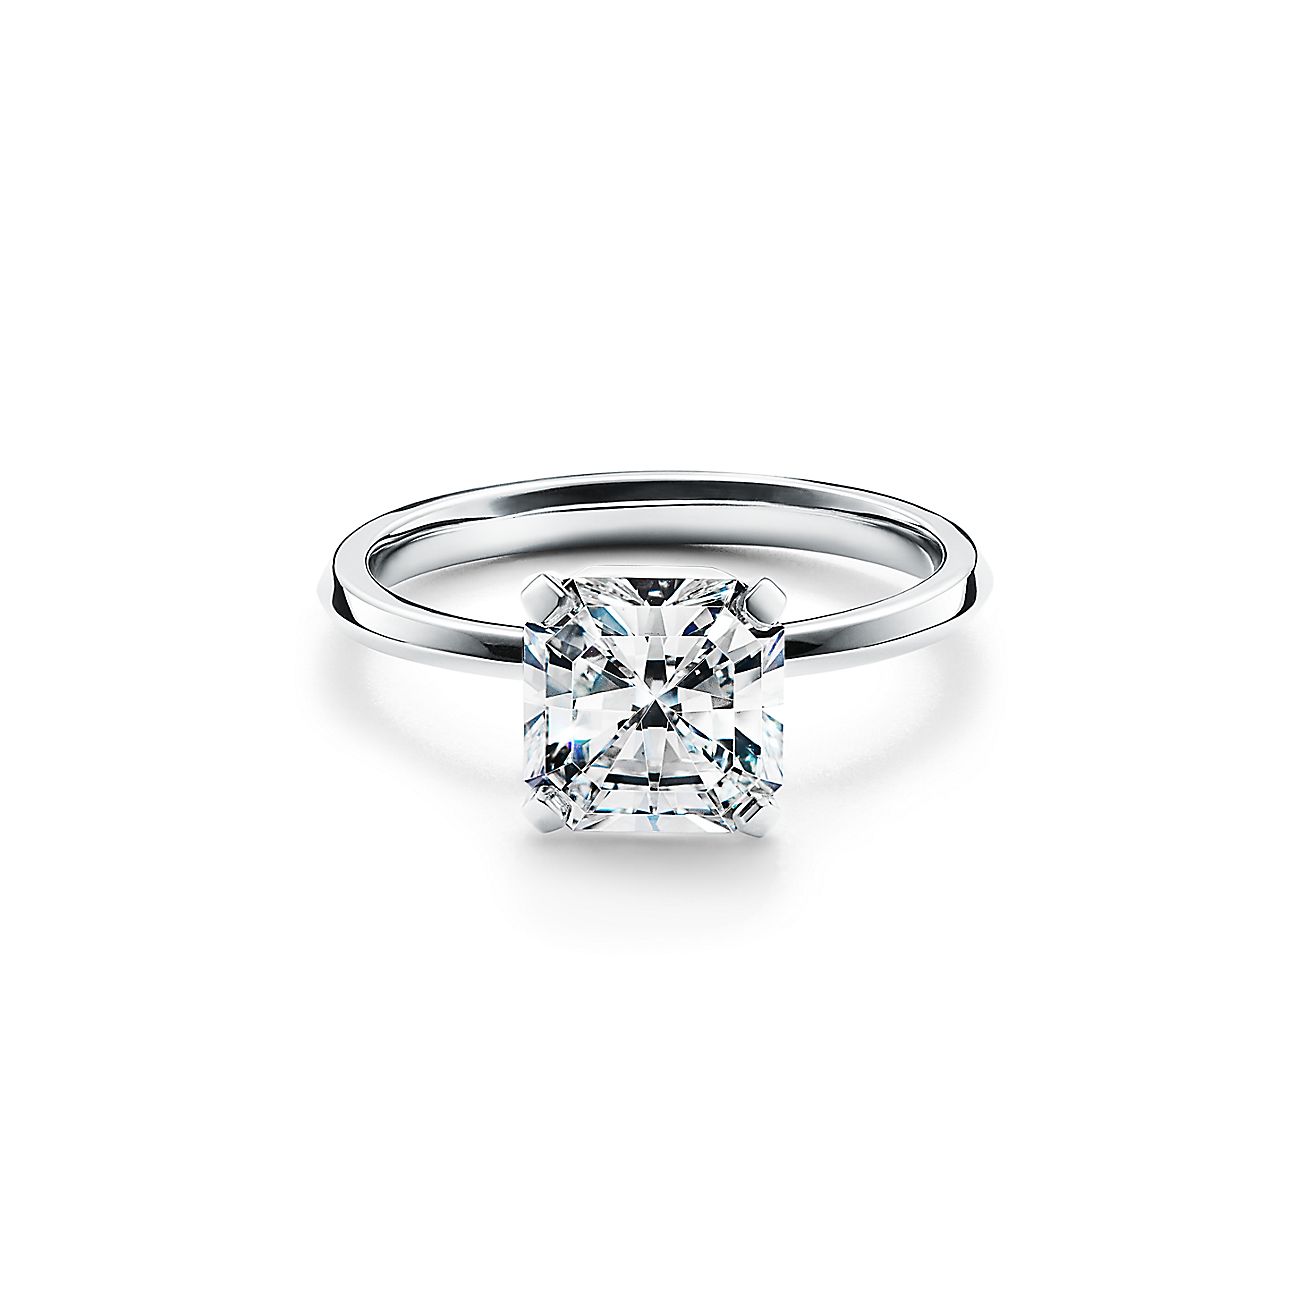 Tiffany True® Engagement Ring In Platinum: An Icon Of Modern Love. | Tiffany  & Co.